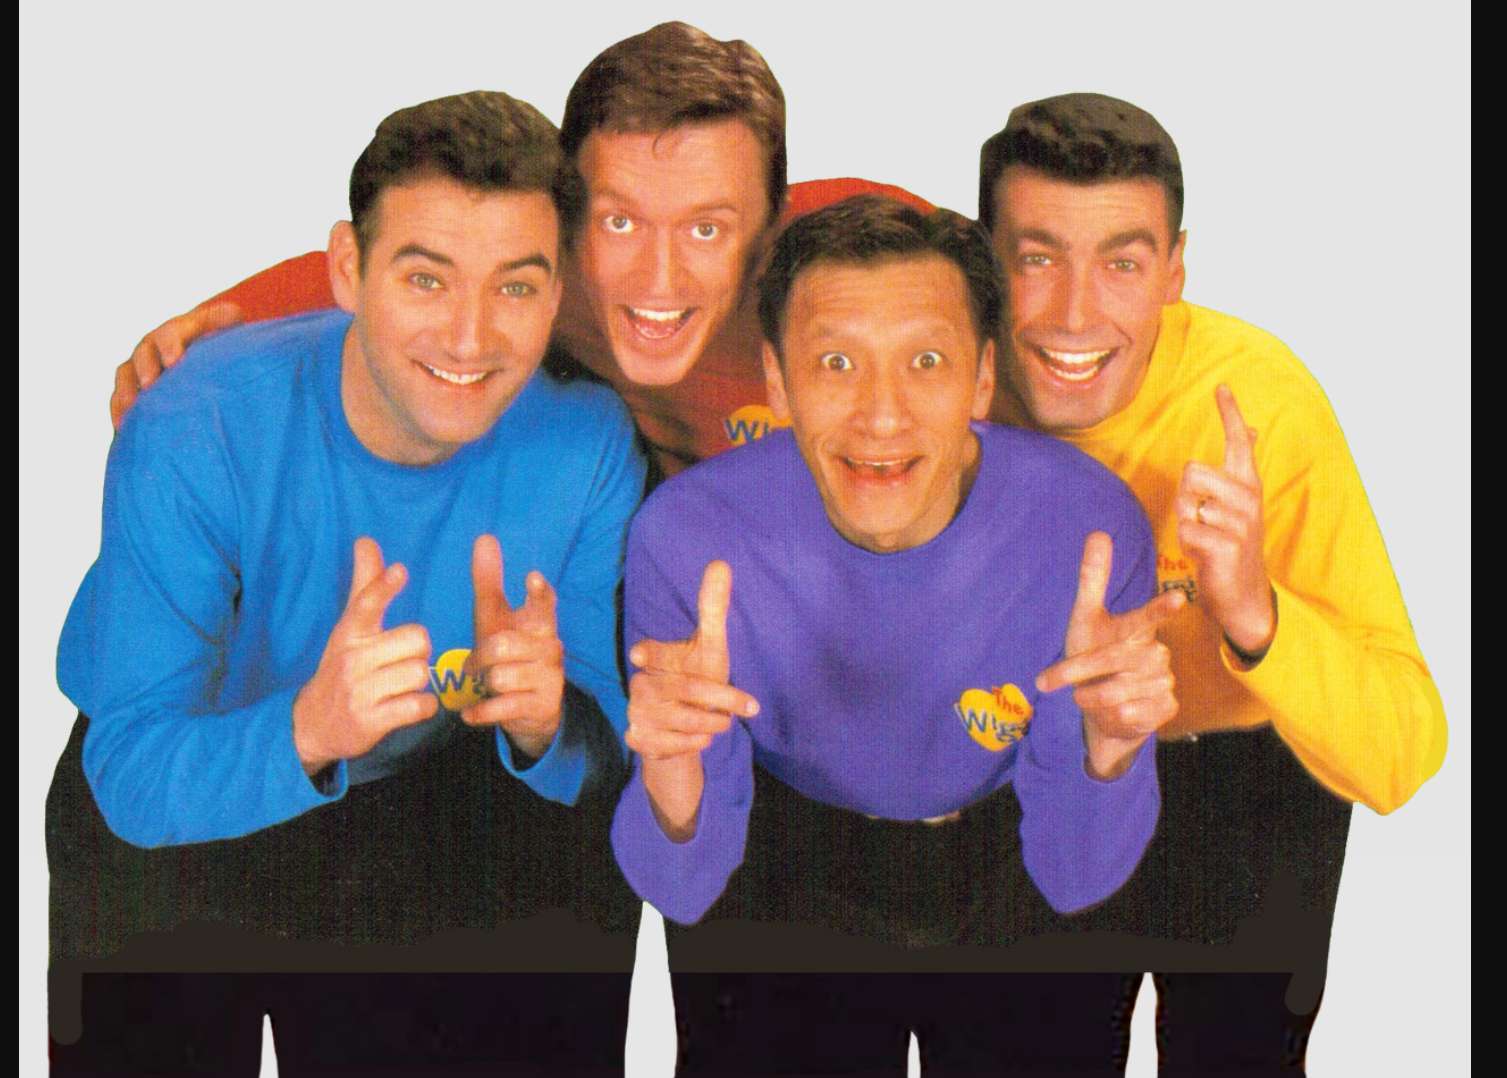 1997 Photoshoot For Wiggles Big Show Tour jigsaw puzzle online